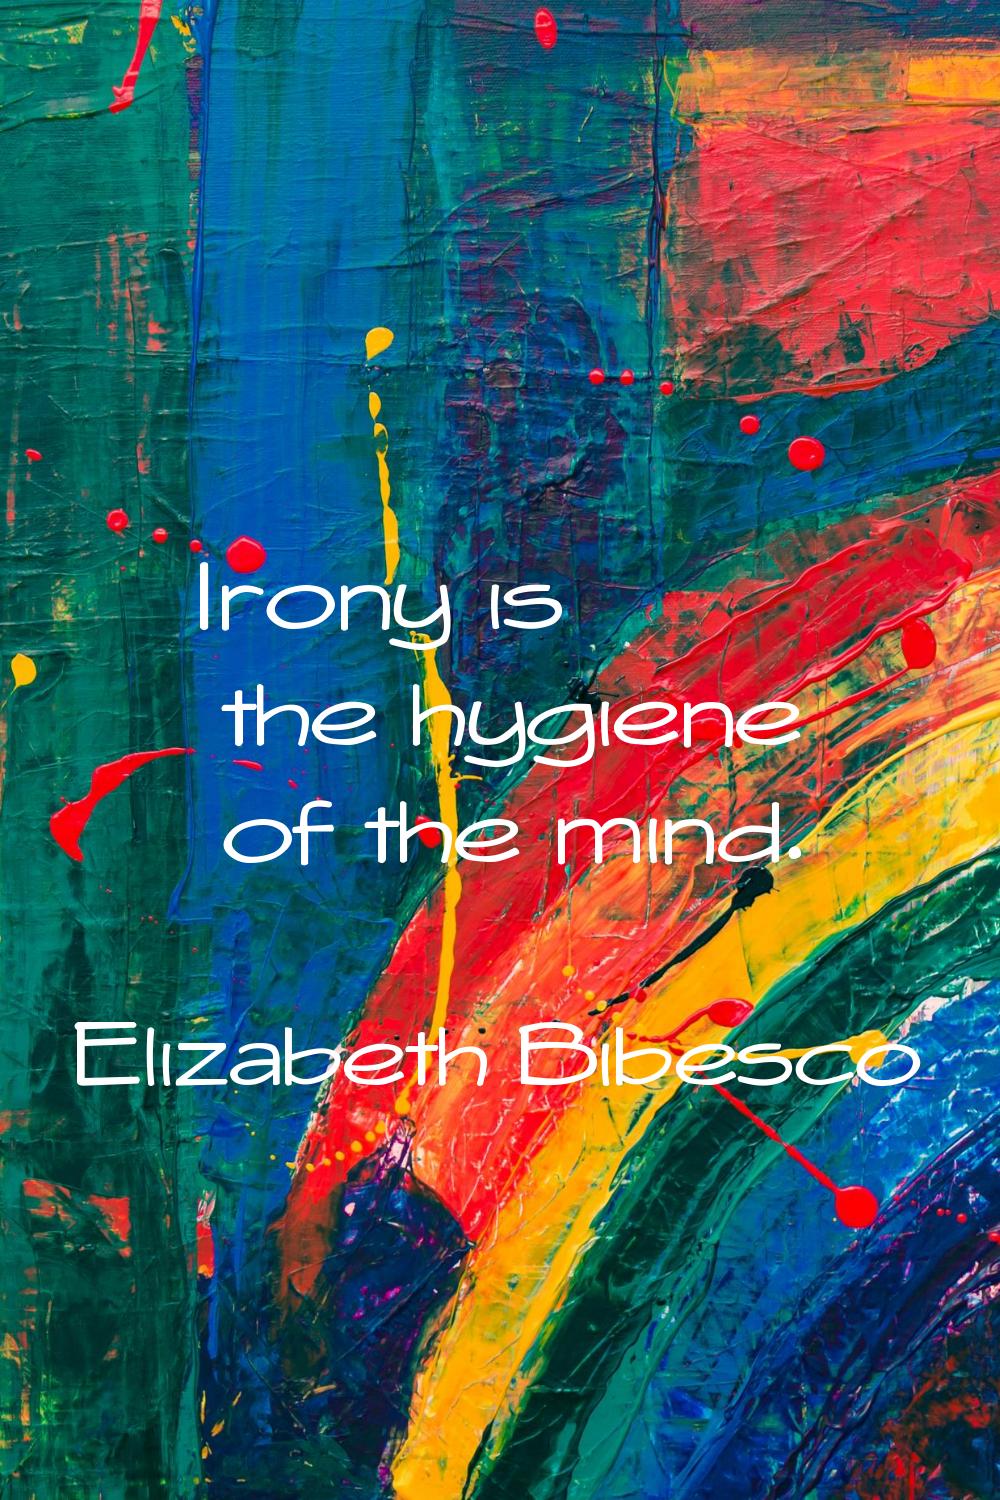 Irony is the hygiene of the mind.